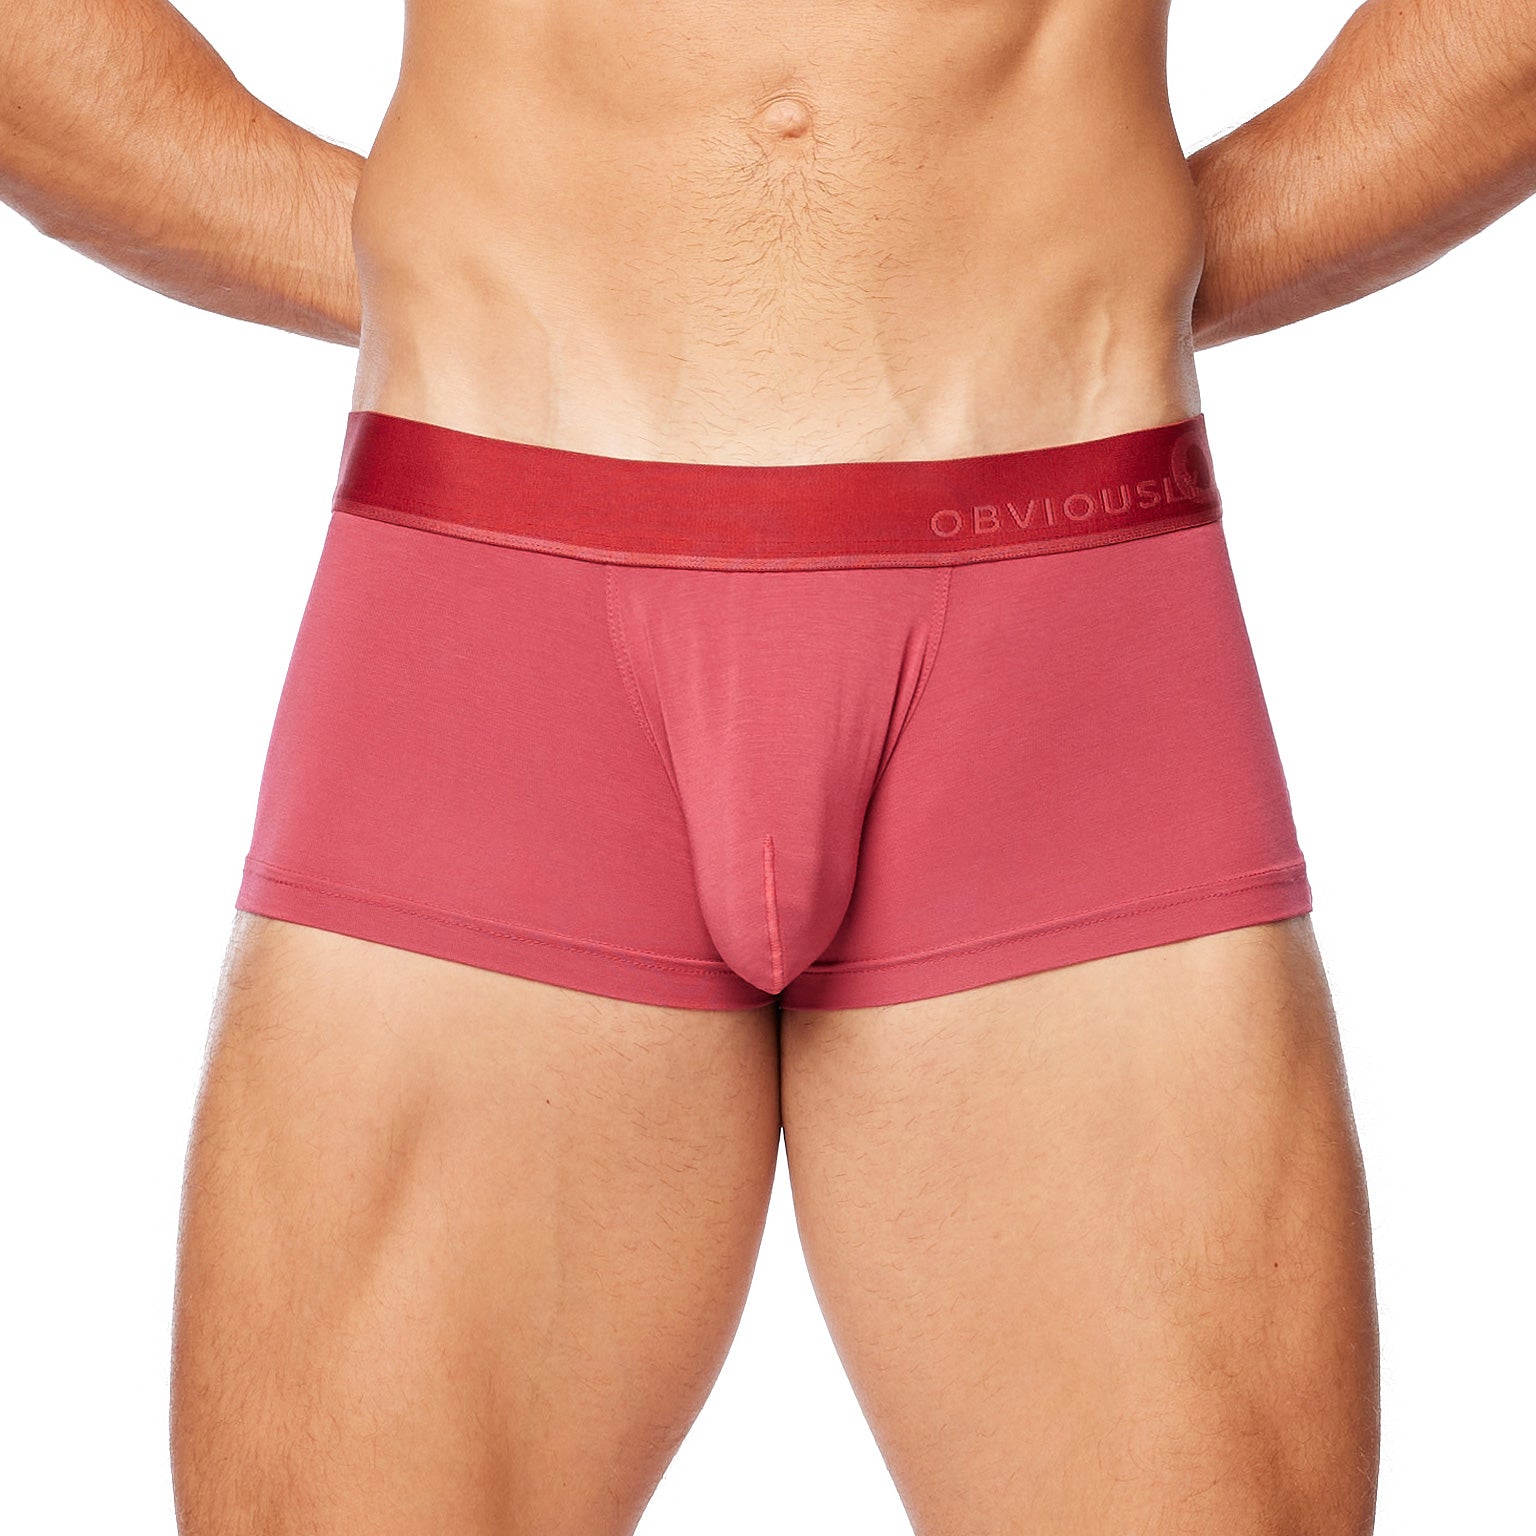 In our magazine today: Real Men in Underwear! Lovely Ben from Germany  posing in his Shaped Pouch Trunks in burgundy red from AdamSmithWear :  r/menandunderwear